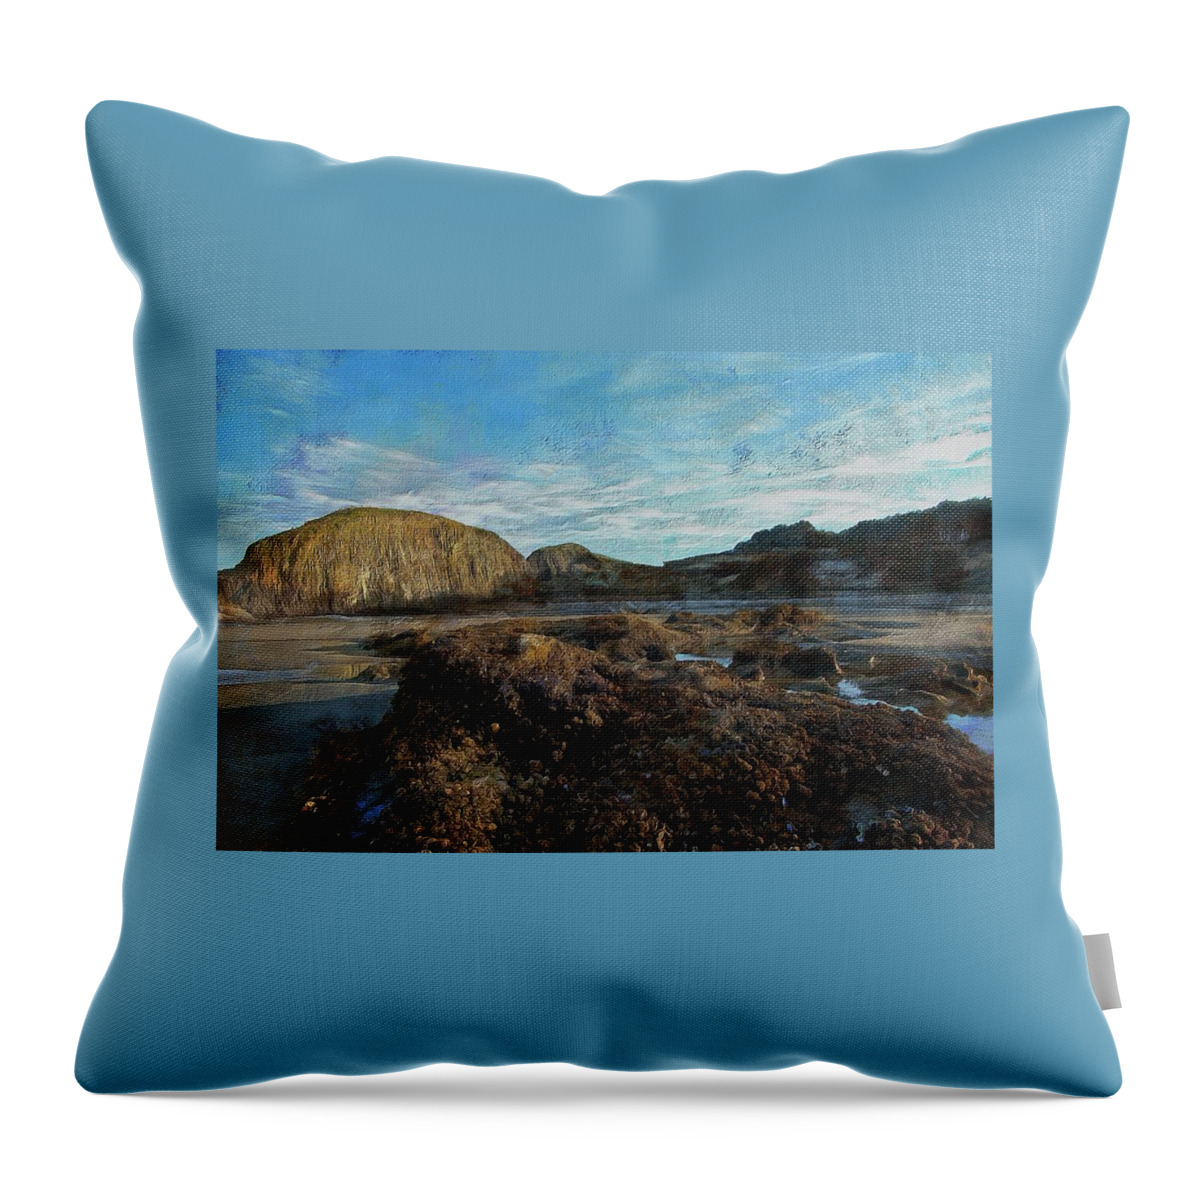 Barnacles Throw Pillow featuring the photograph Barnacles On The Beach by Thom Zehrfeld